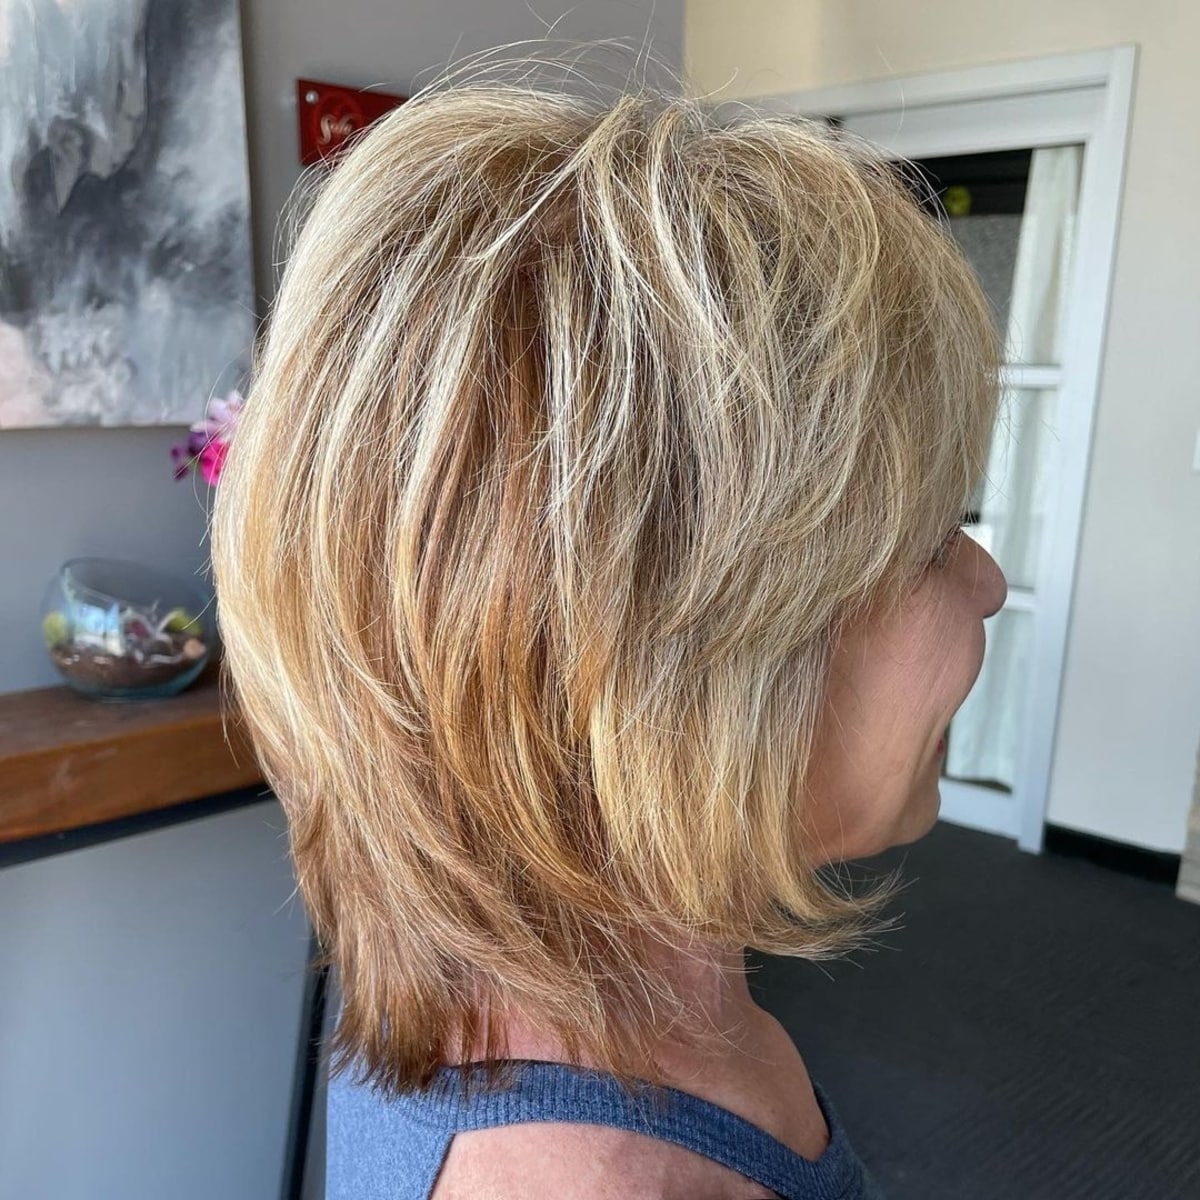 Uneven lob with highlights and feathered layers